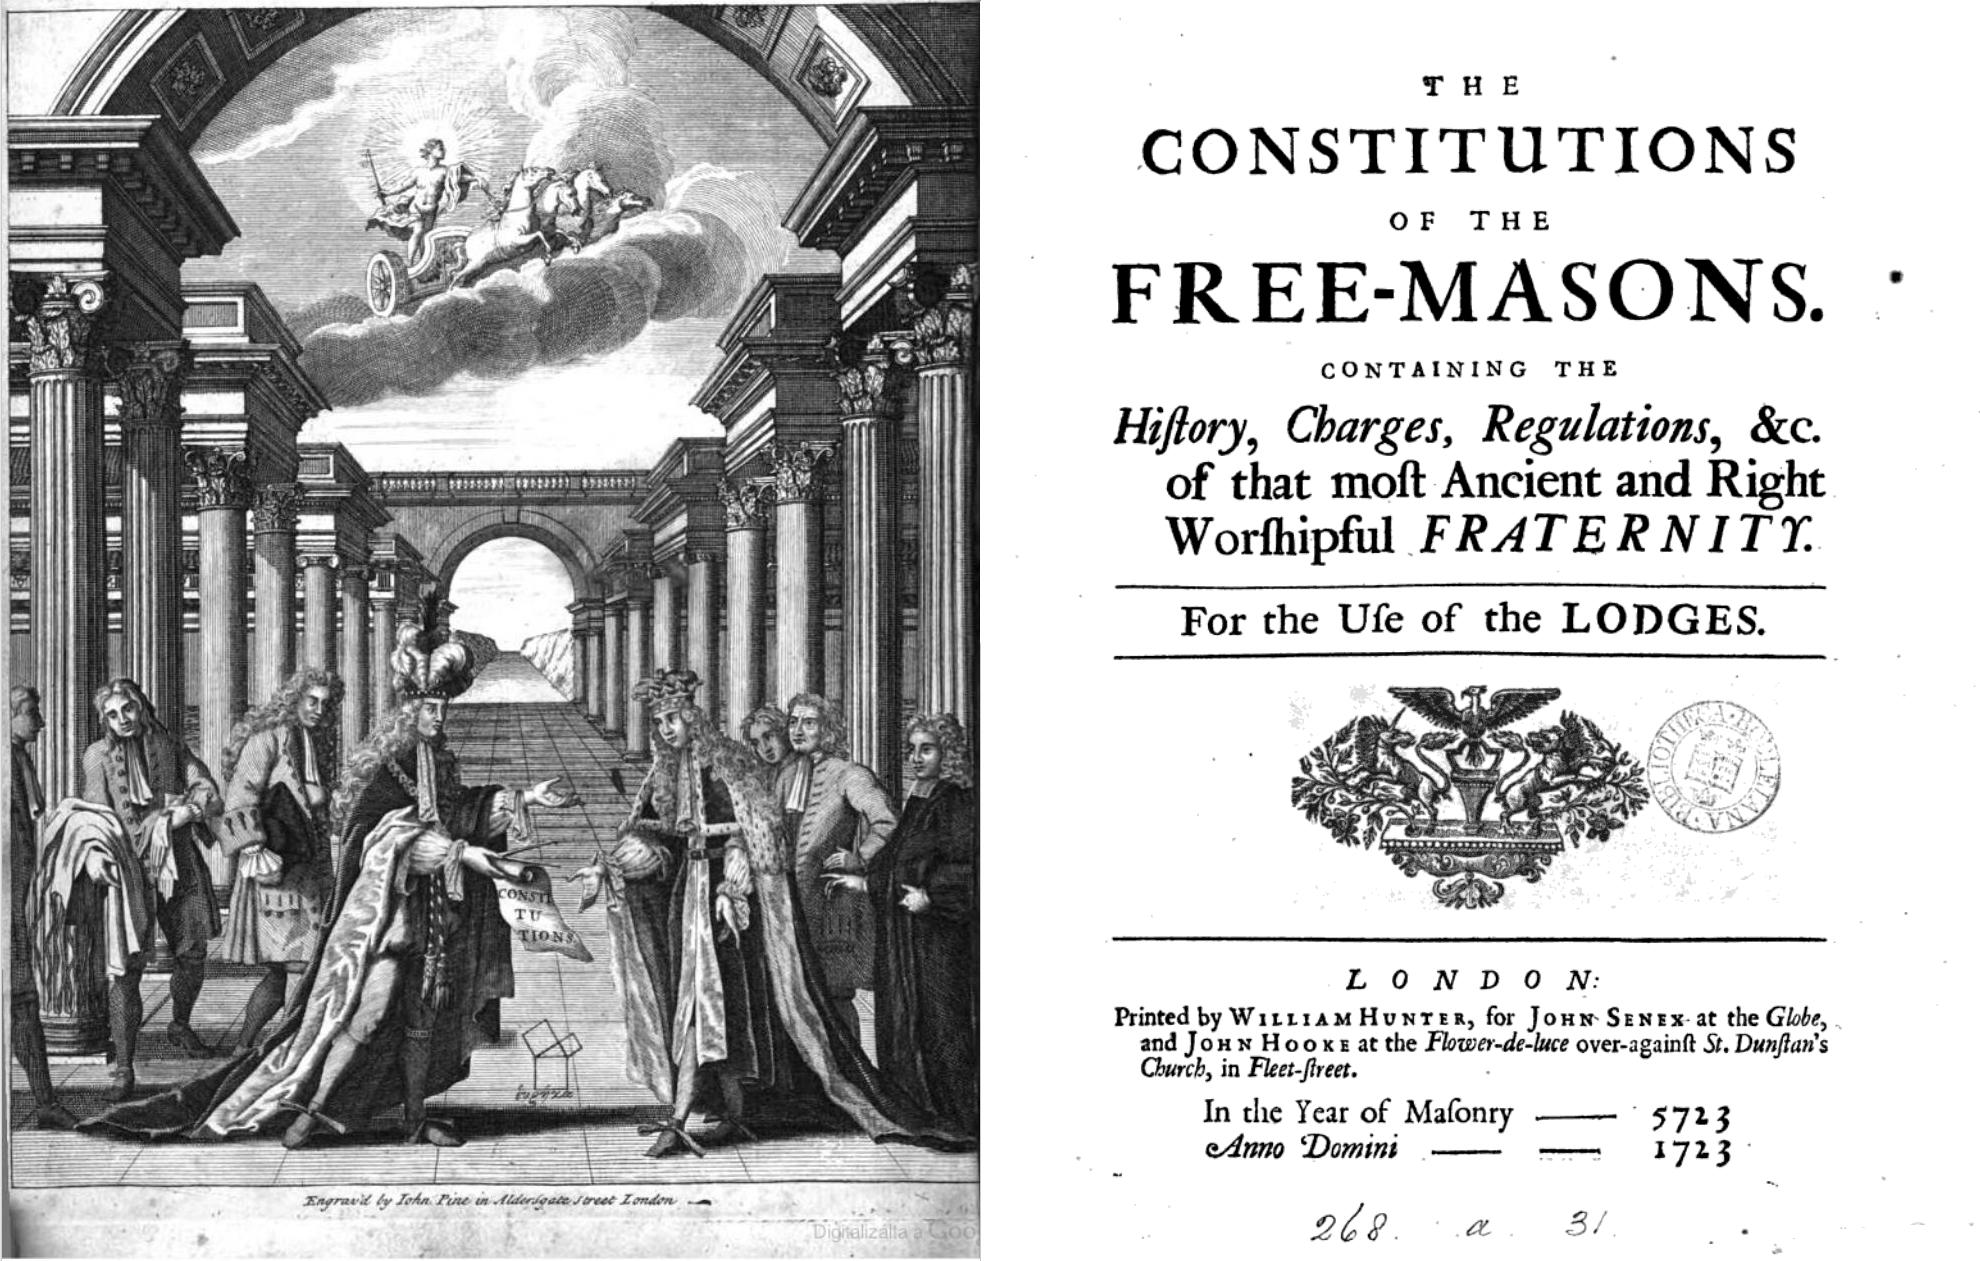 Anderson's Constitutions